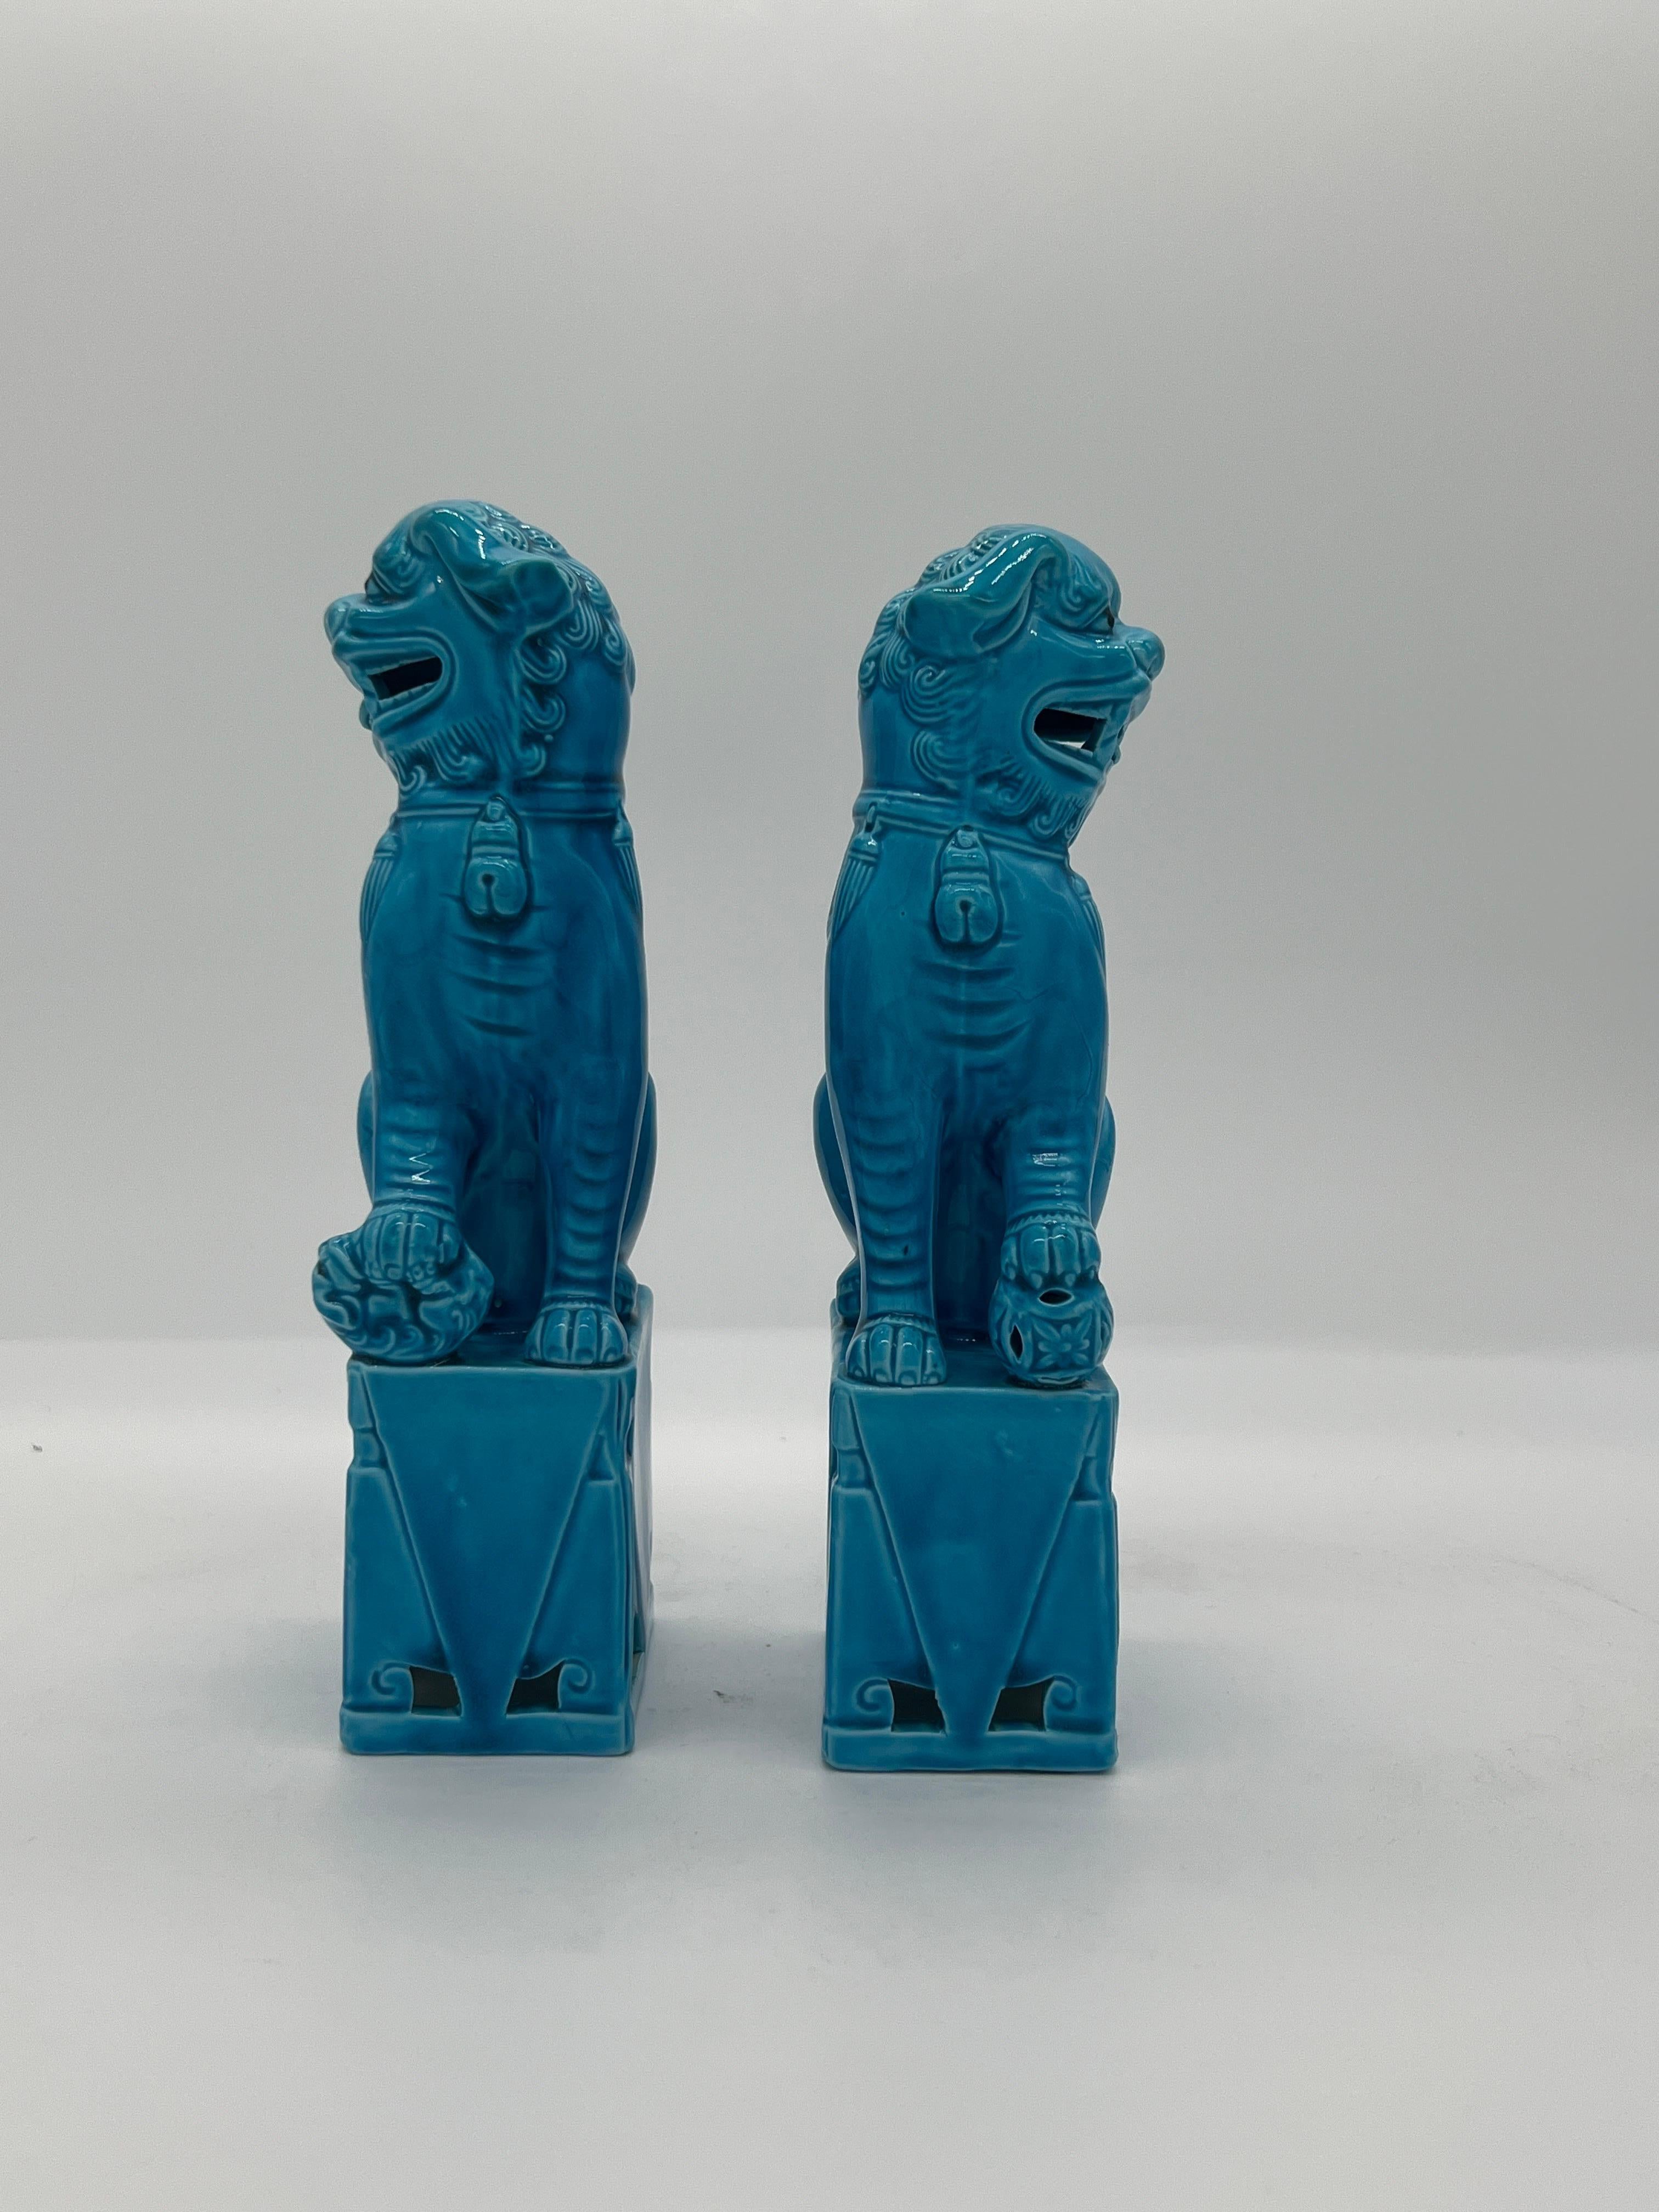 Chinese, mid century. 

A pair of turquoise blue ceramic foo dog sculptures, likely circa 1950 or 60.